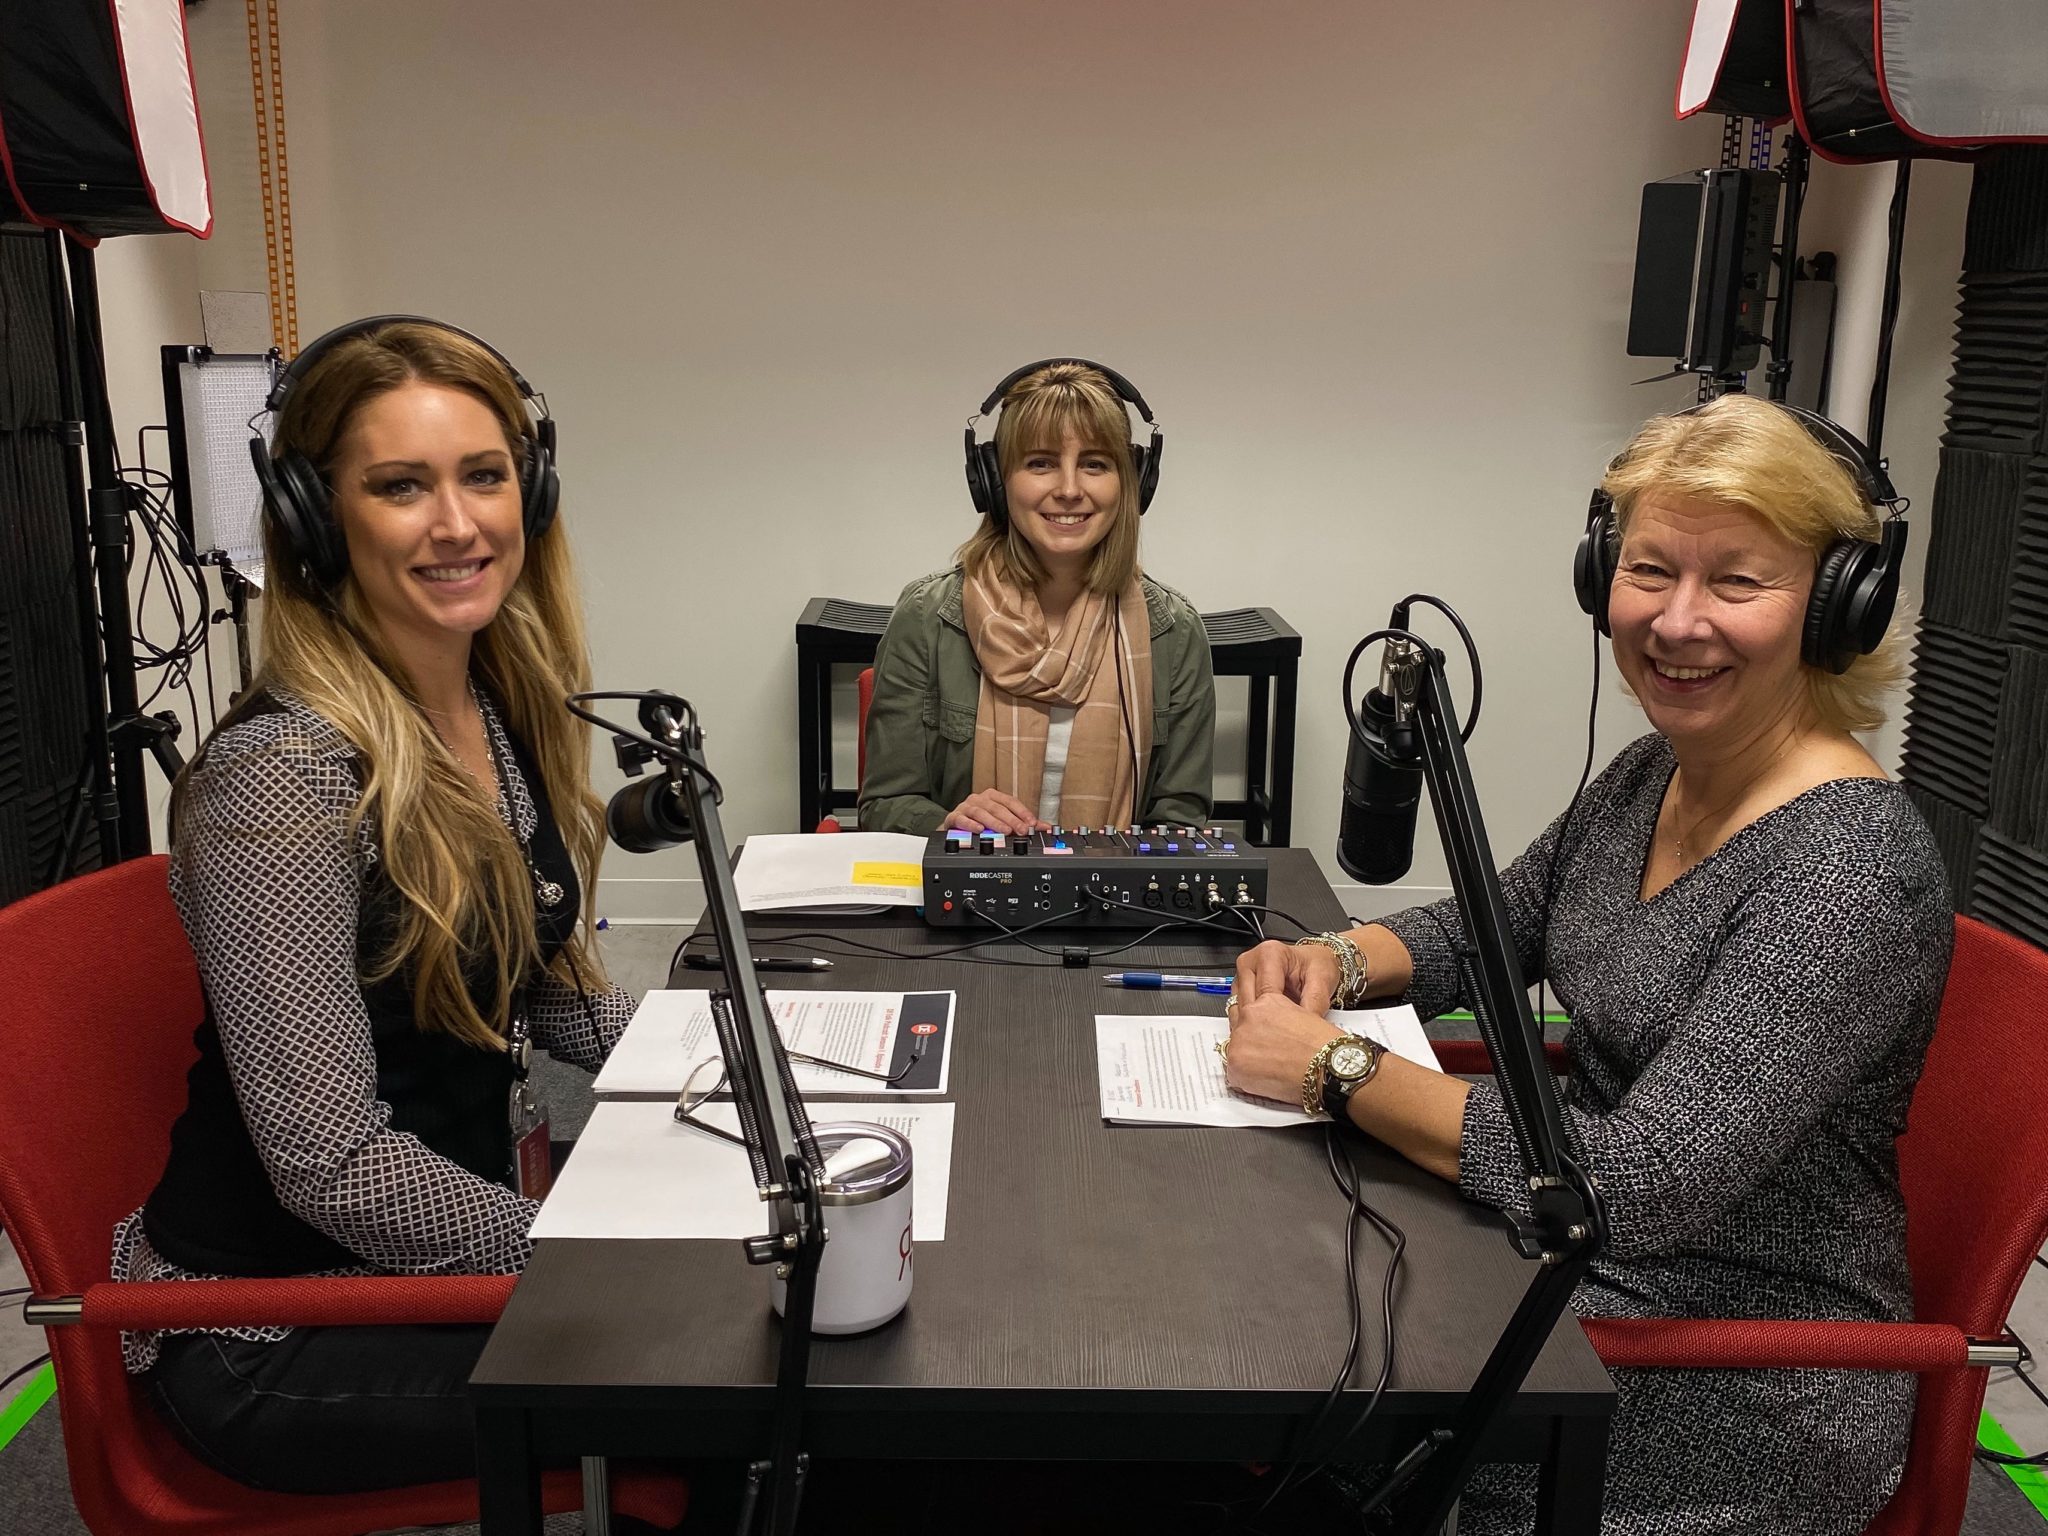 Recruit Rooster COO, Heather Hoffman, and DirectEmployer Executive Director, Candee Chambers, record an episodeo of the DE Talk podcast with producer Jordan Hartman